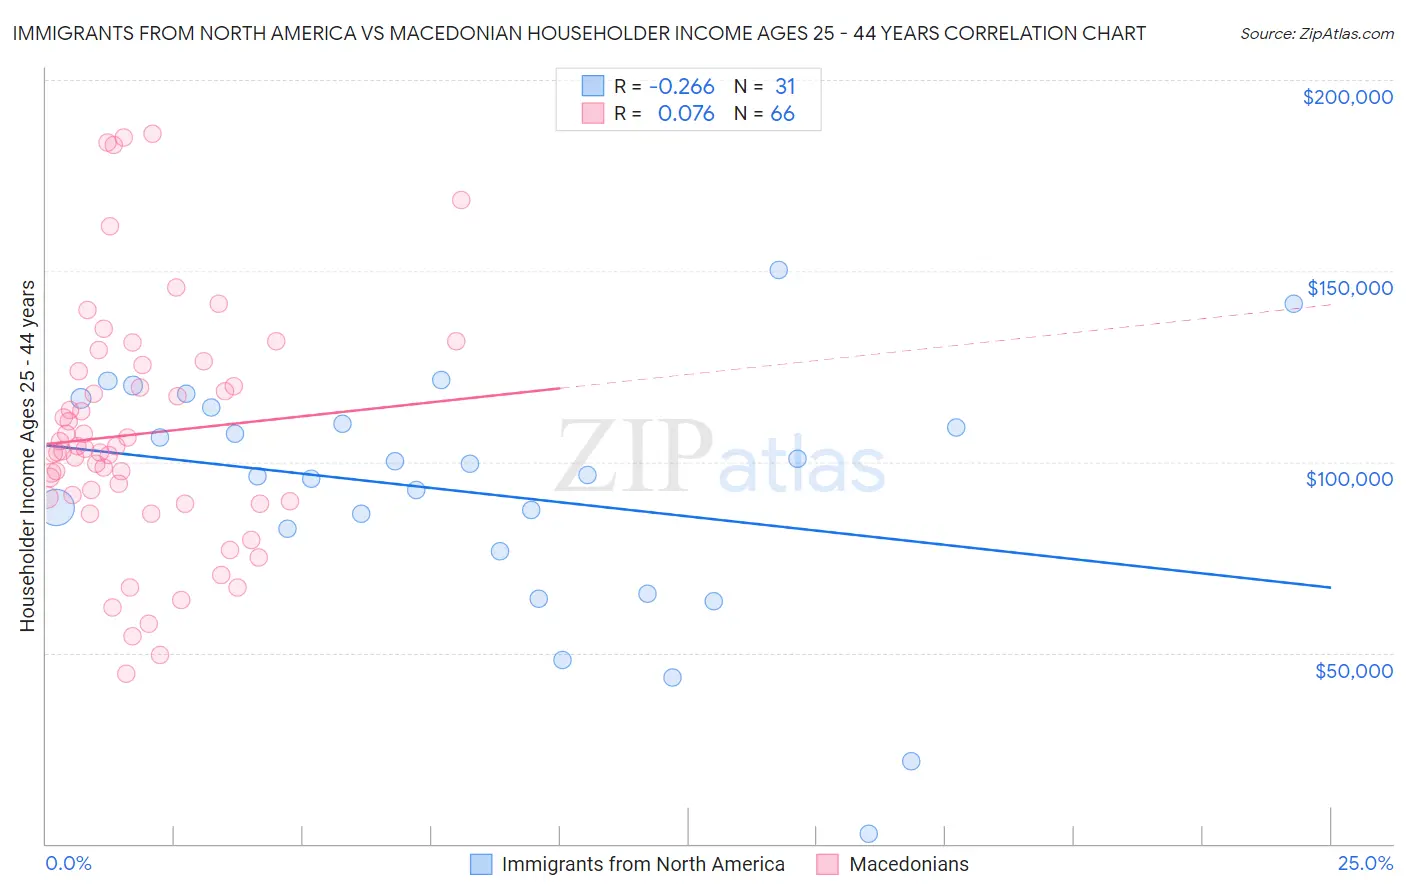 Immigrants from North America vs Macedonian Householder Income Ages 25 - 44 years